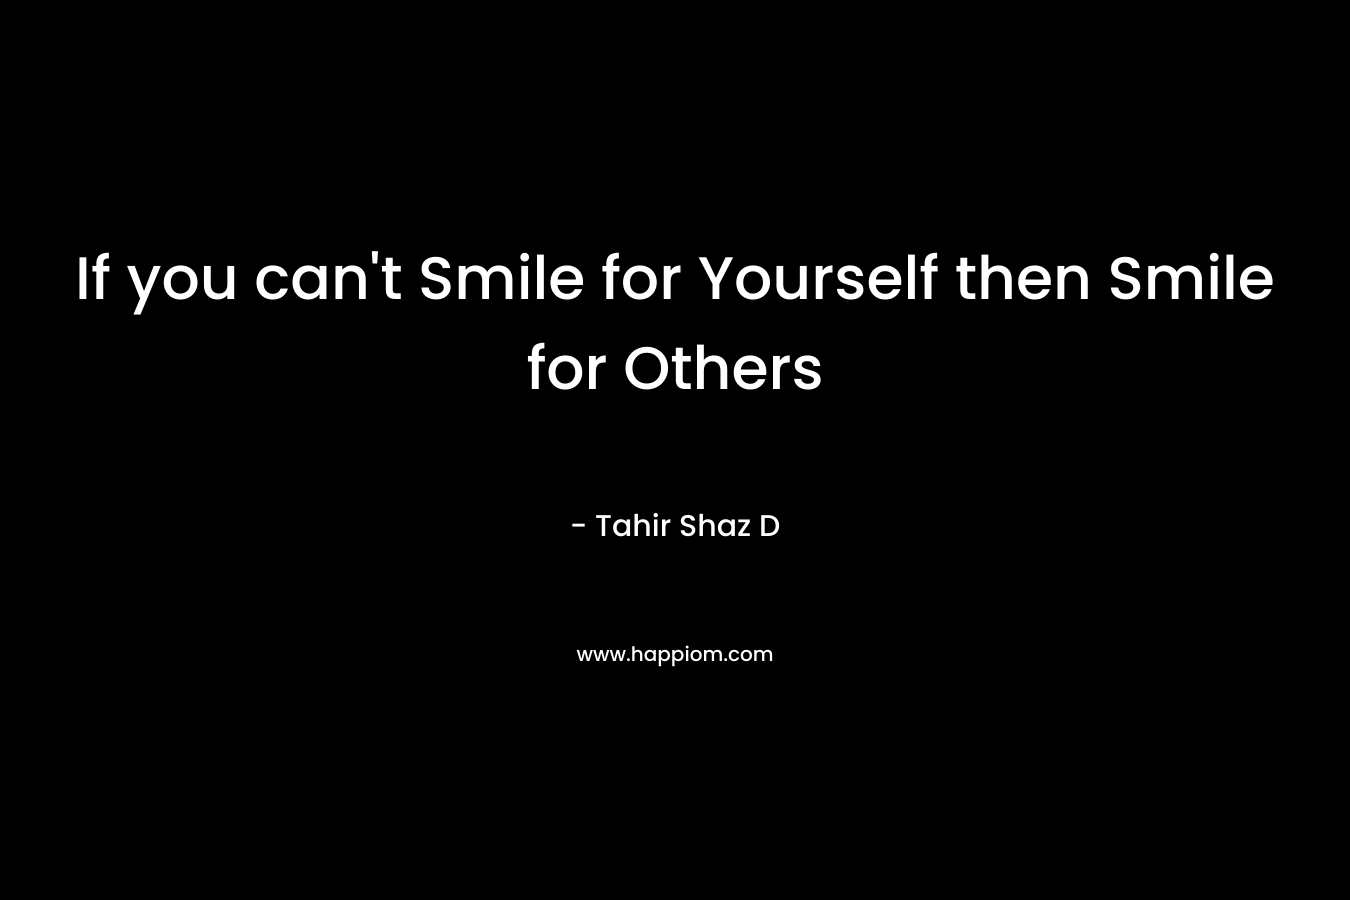 If you can't Smile for Yourself then Smile for Others